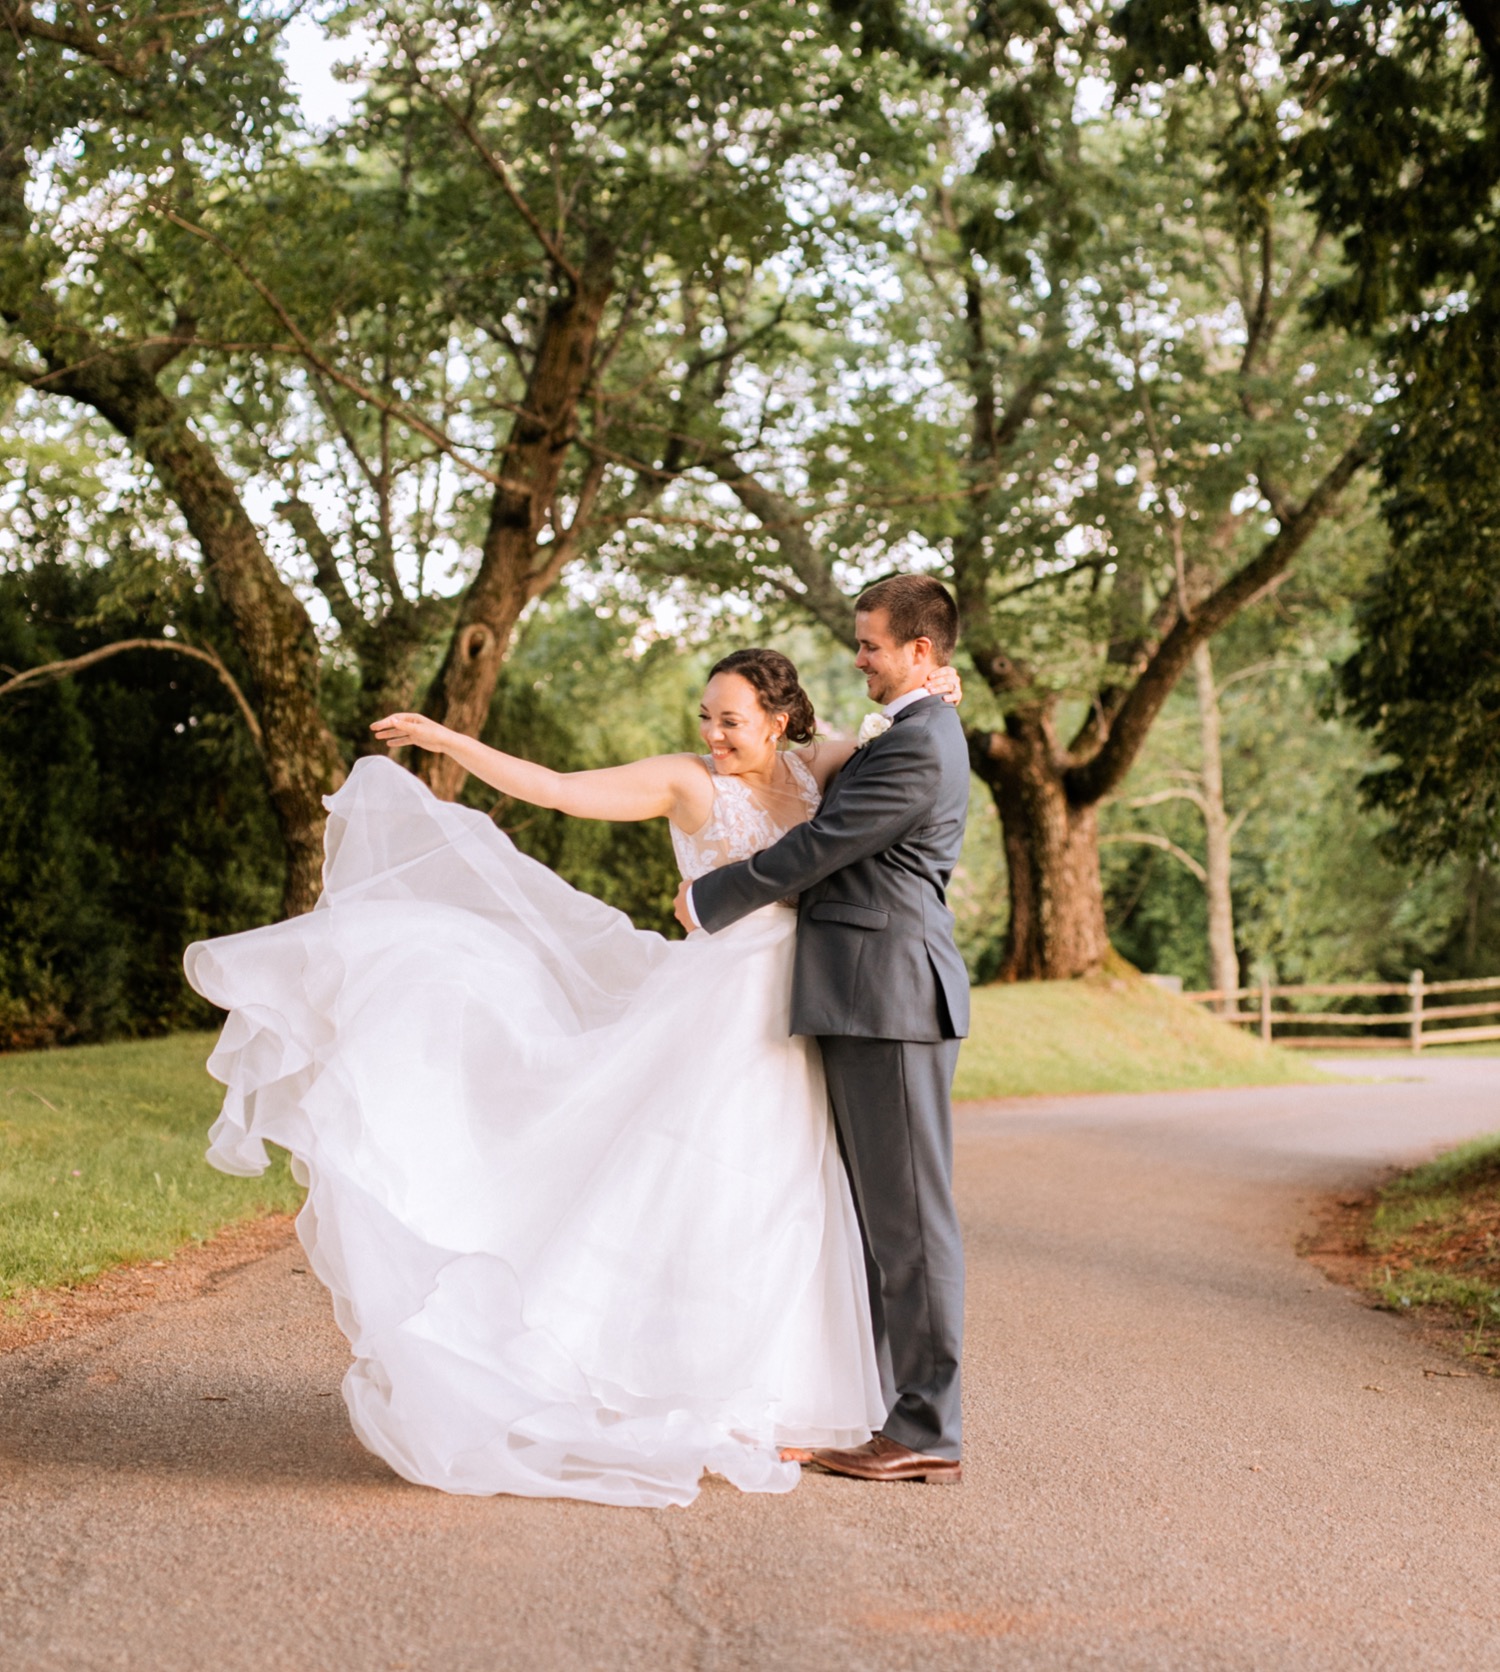 Bride and groom celebrate their wedding day at James Monroe's Highland in Charlottesville, VA